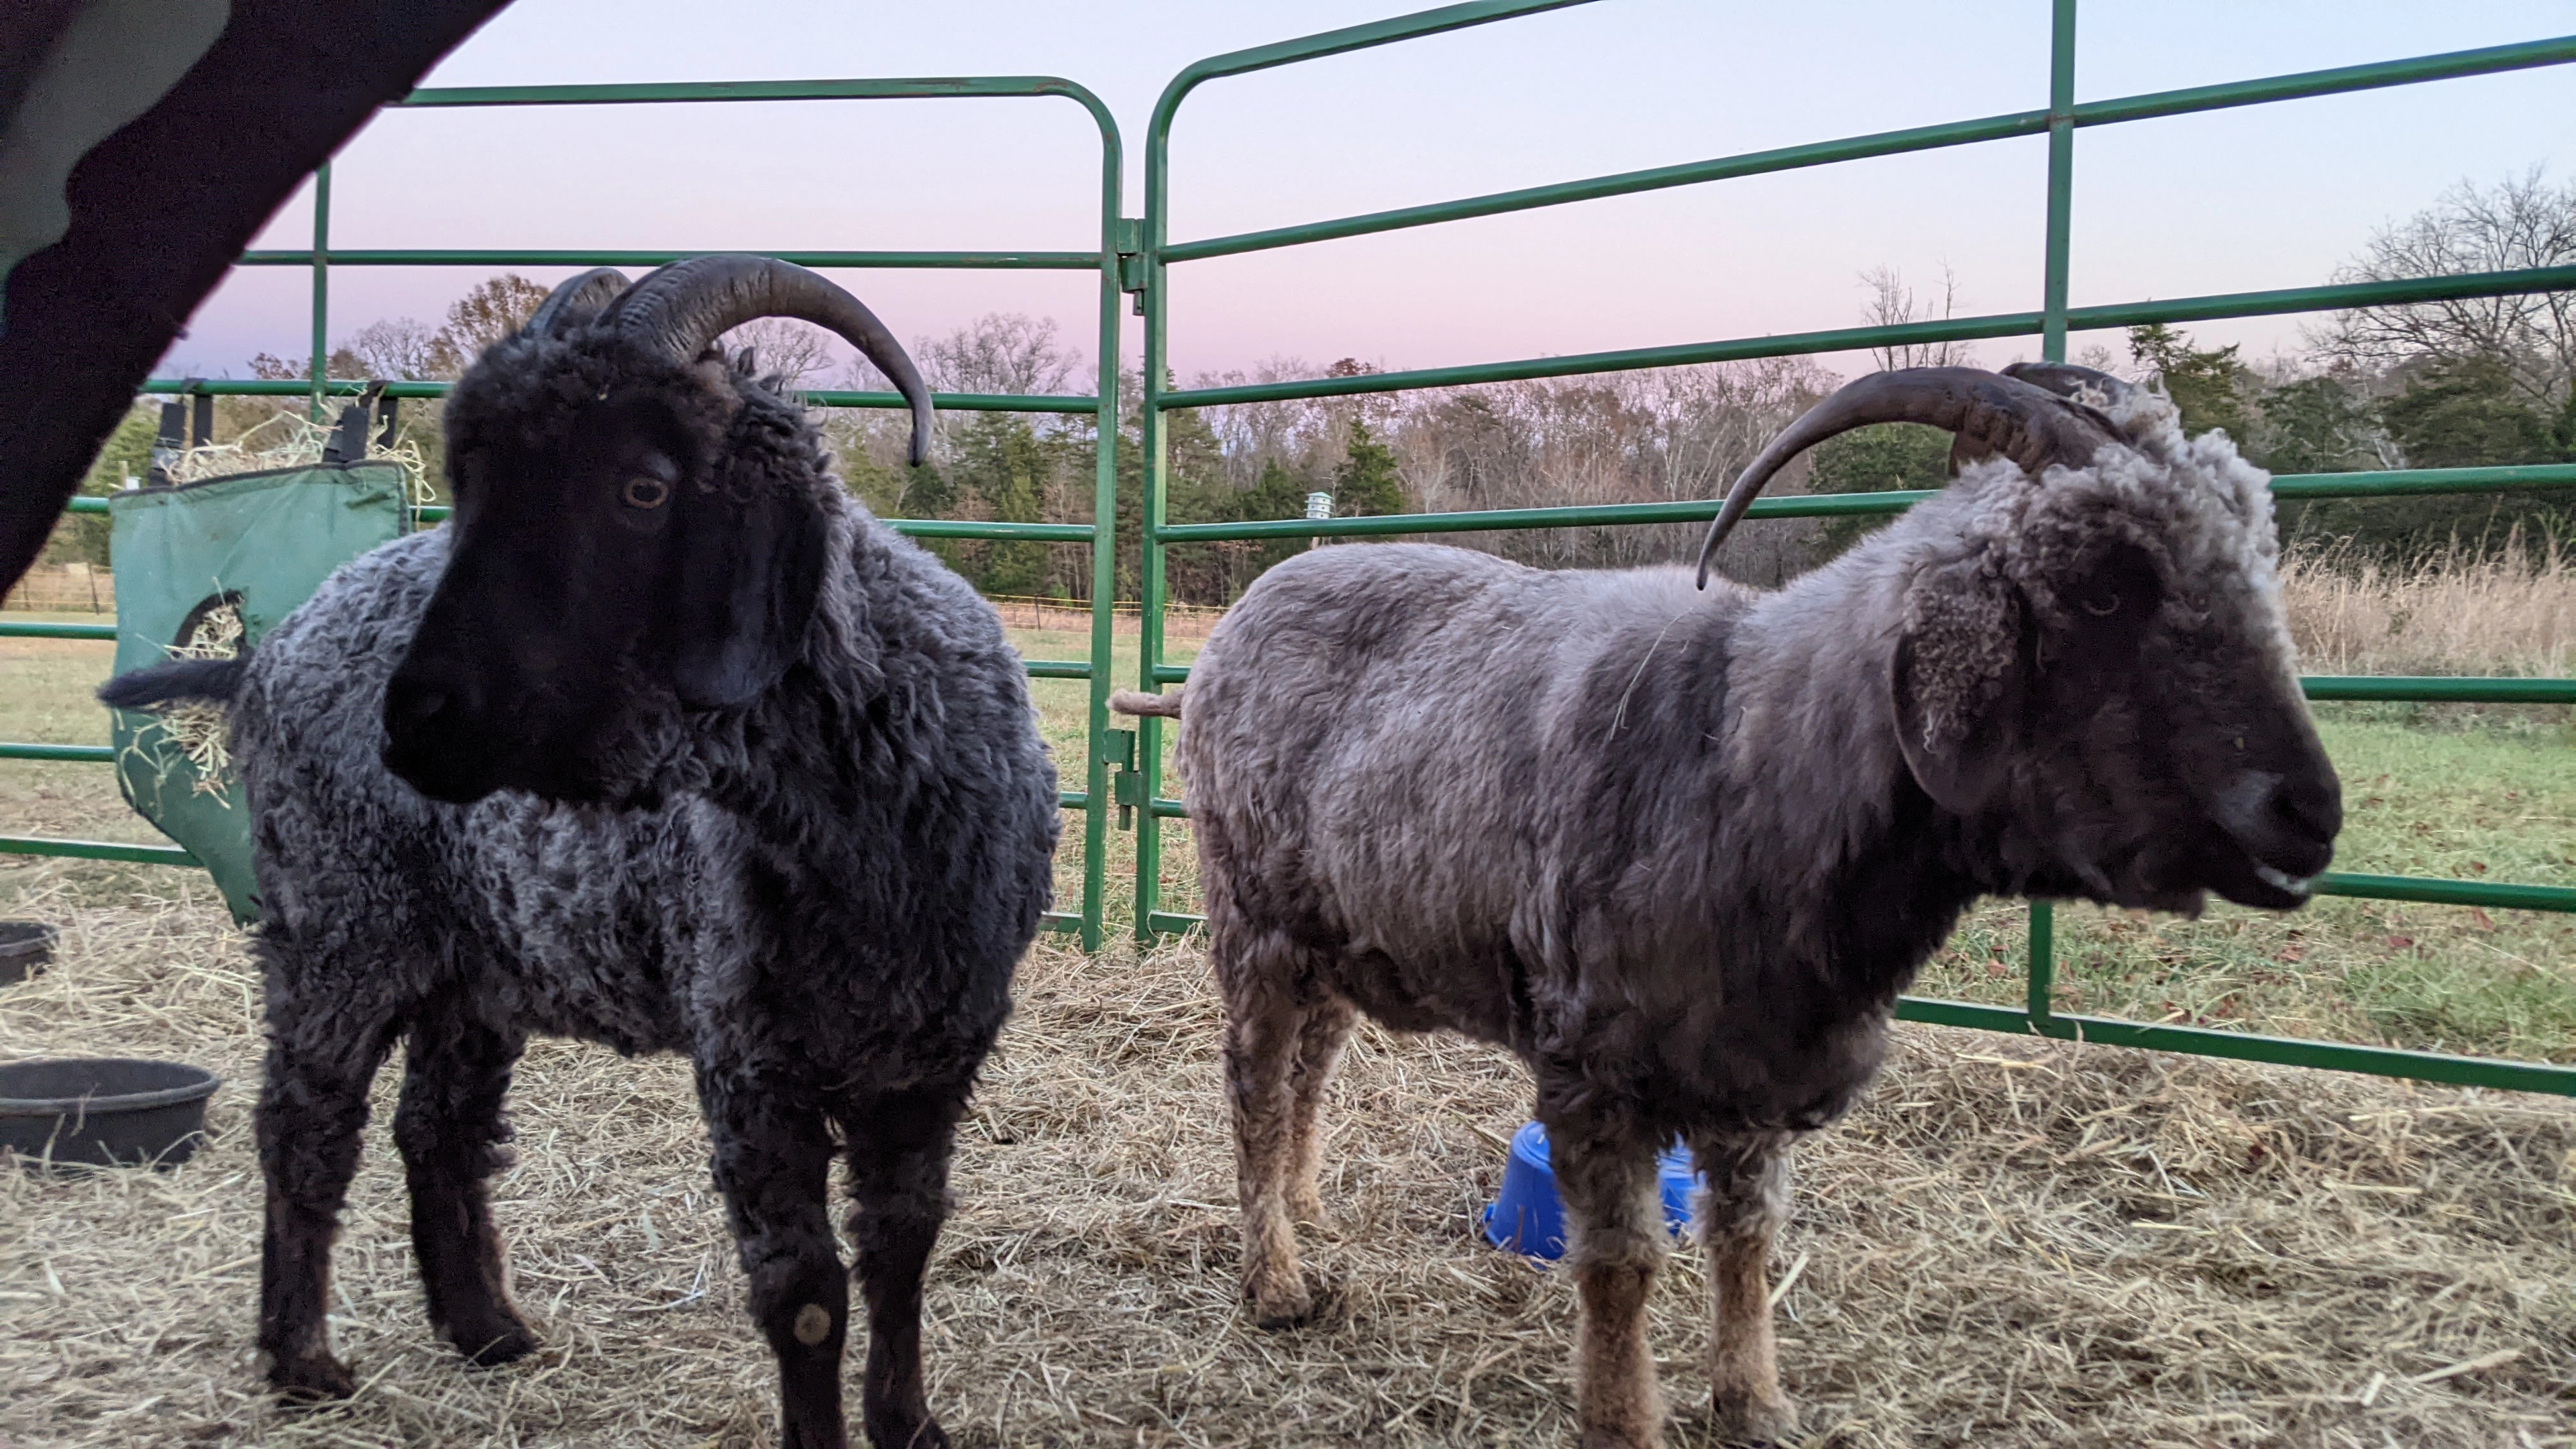 An image of a pair goats named Freddie (left) and Morpheus (right).